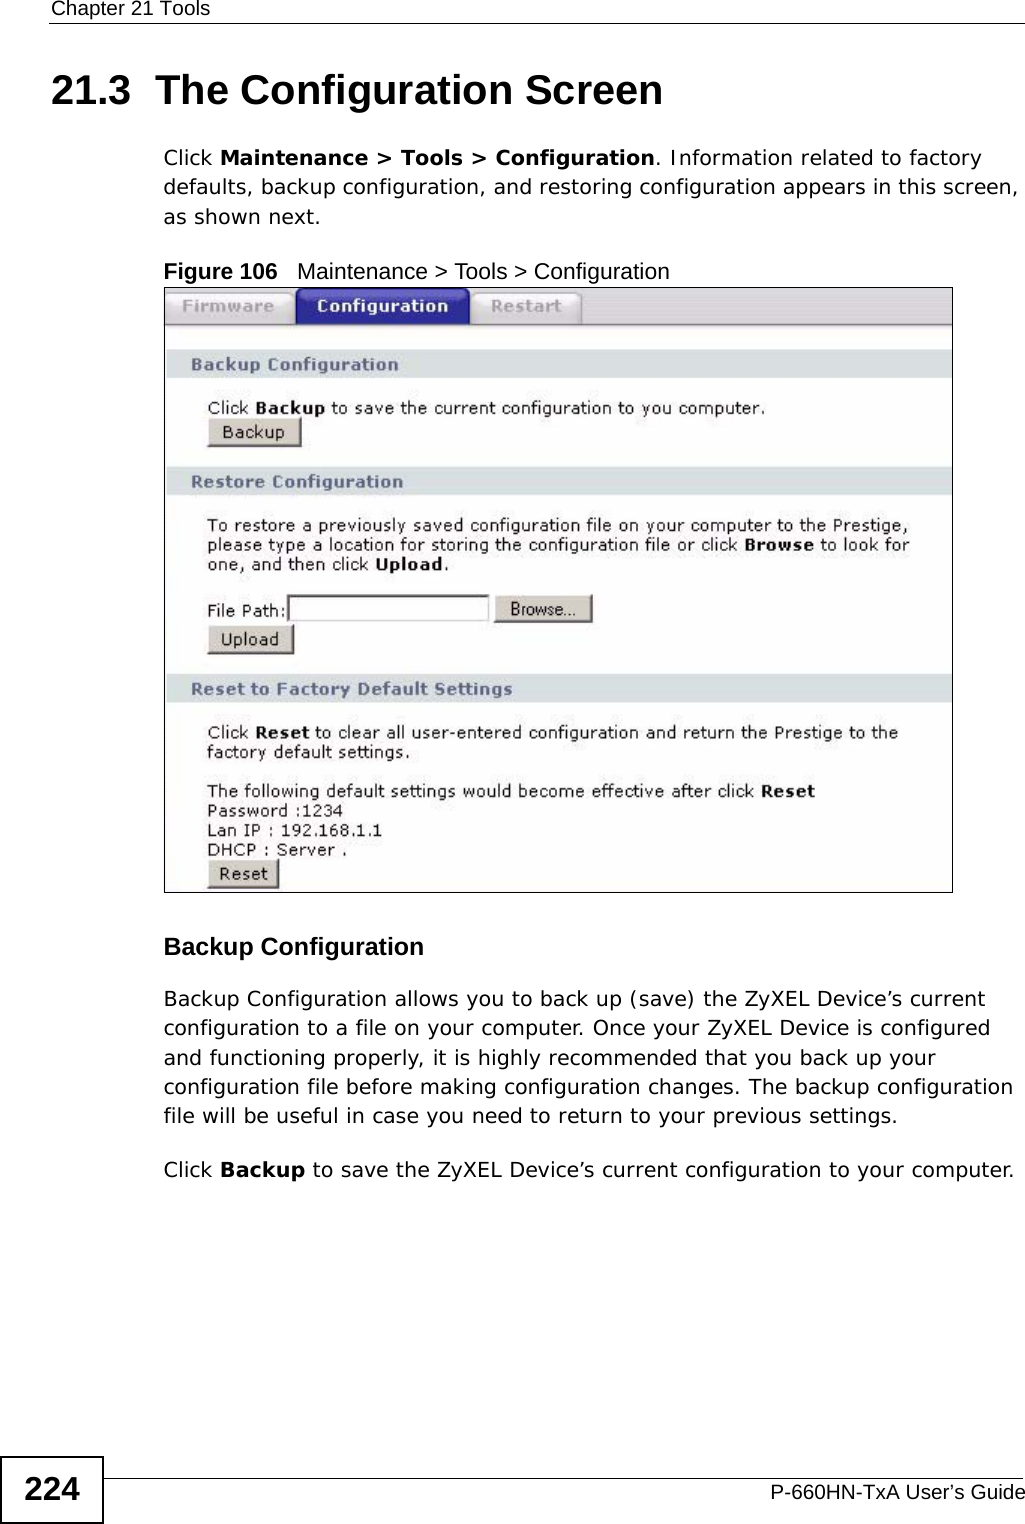 Chapter 21 ToolsP-660HN-TxA User’s Guide22421.3  The Configuration Screen Click Maintenance &gt; Tools &gt; Configuration. Information related to factory defaults, backup configuration, and restoring configuration appears in this screen, as shown next.Figure 106   Maintenance &gt; Tools &gt; ConfigurationBackup Configuration Backup Configuration allows you to back up (save) the ZyXEL Device’s current configuration to a file on your computer. Once your ZyXEL Device is configured and functioning properly, it is highly recommended that you back up your configuration file before making configuration changes. The backup configuration file will be useful in case you need to return to your previous settings. Click Backup to save the ZyXEL Device’s current configuration to your computer.